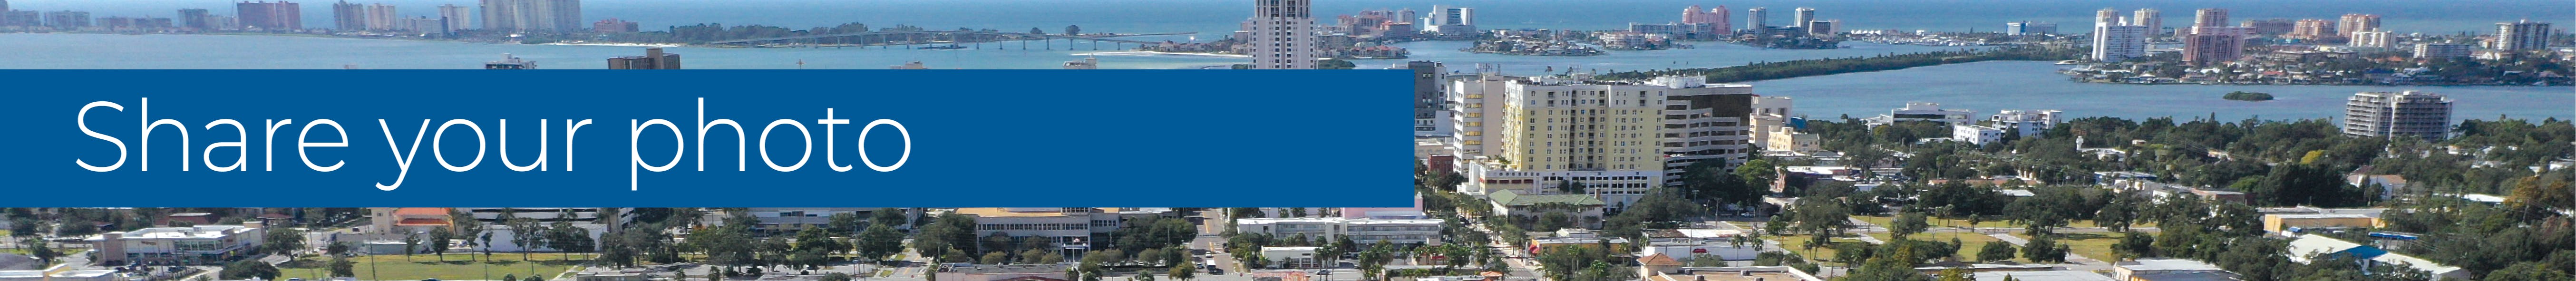 Aerial image of Downtown Clearwater looking west towards the beach and Memorial Causeway. Text over the image says "Share your photo".